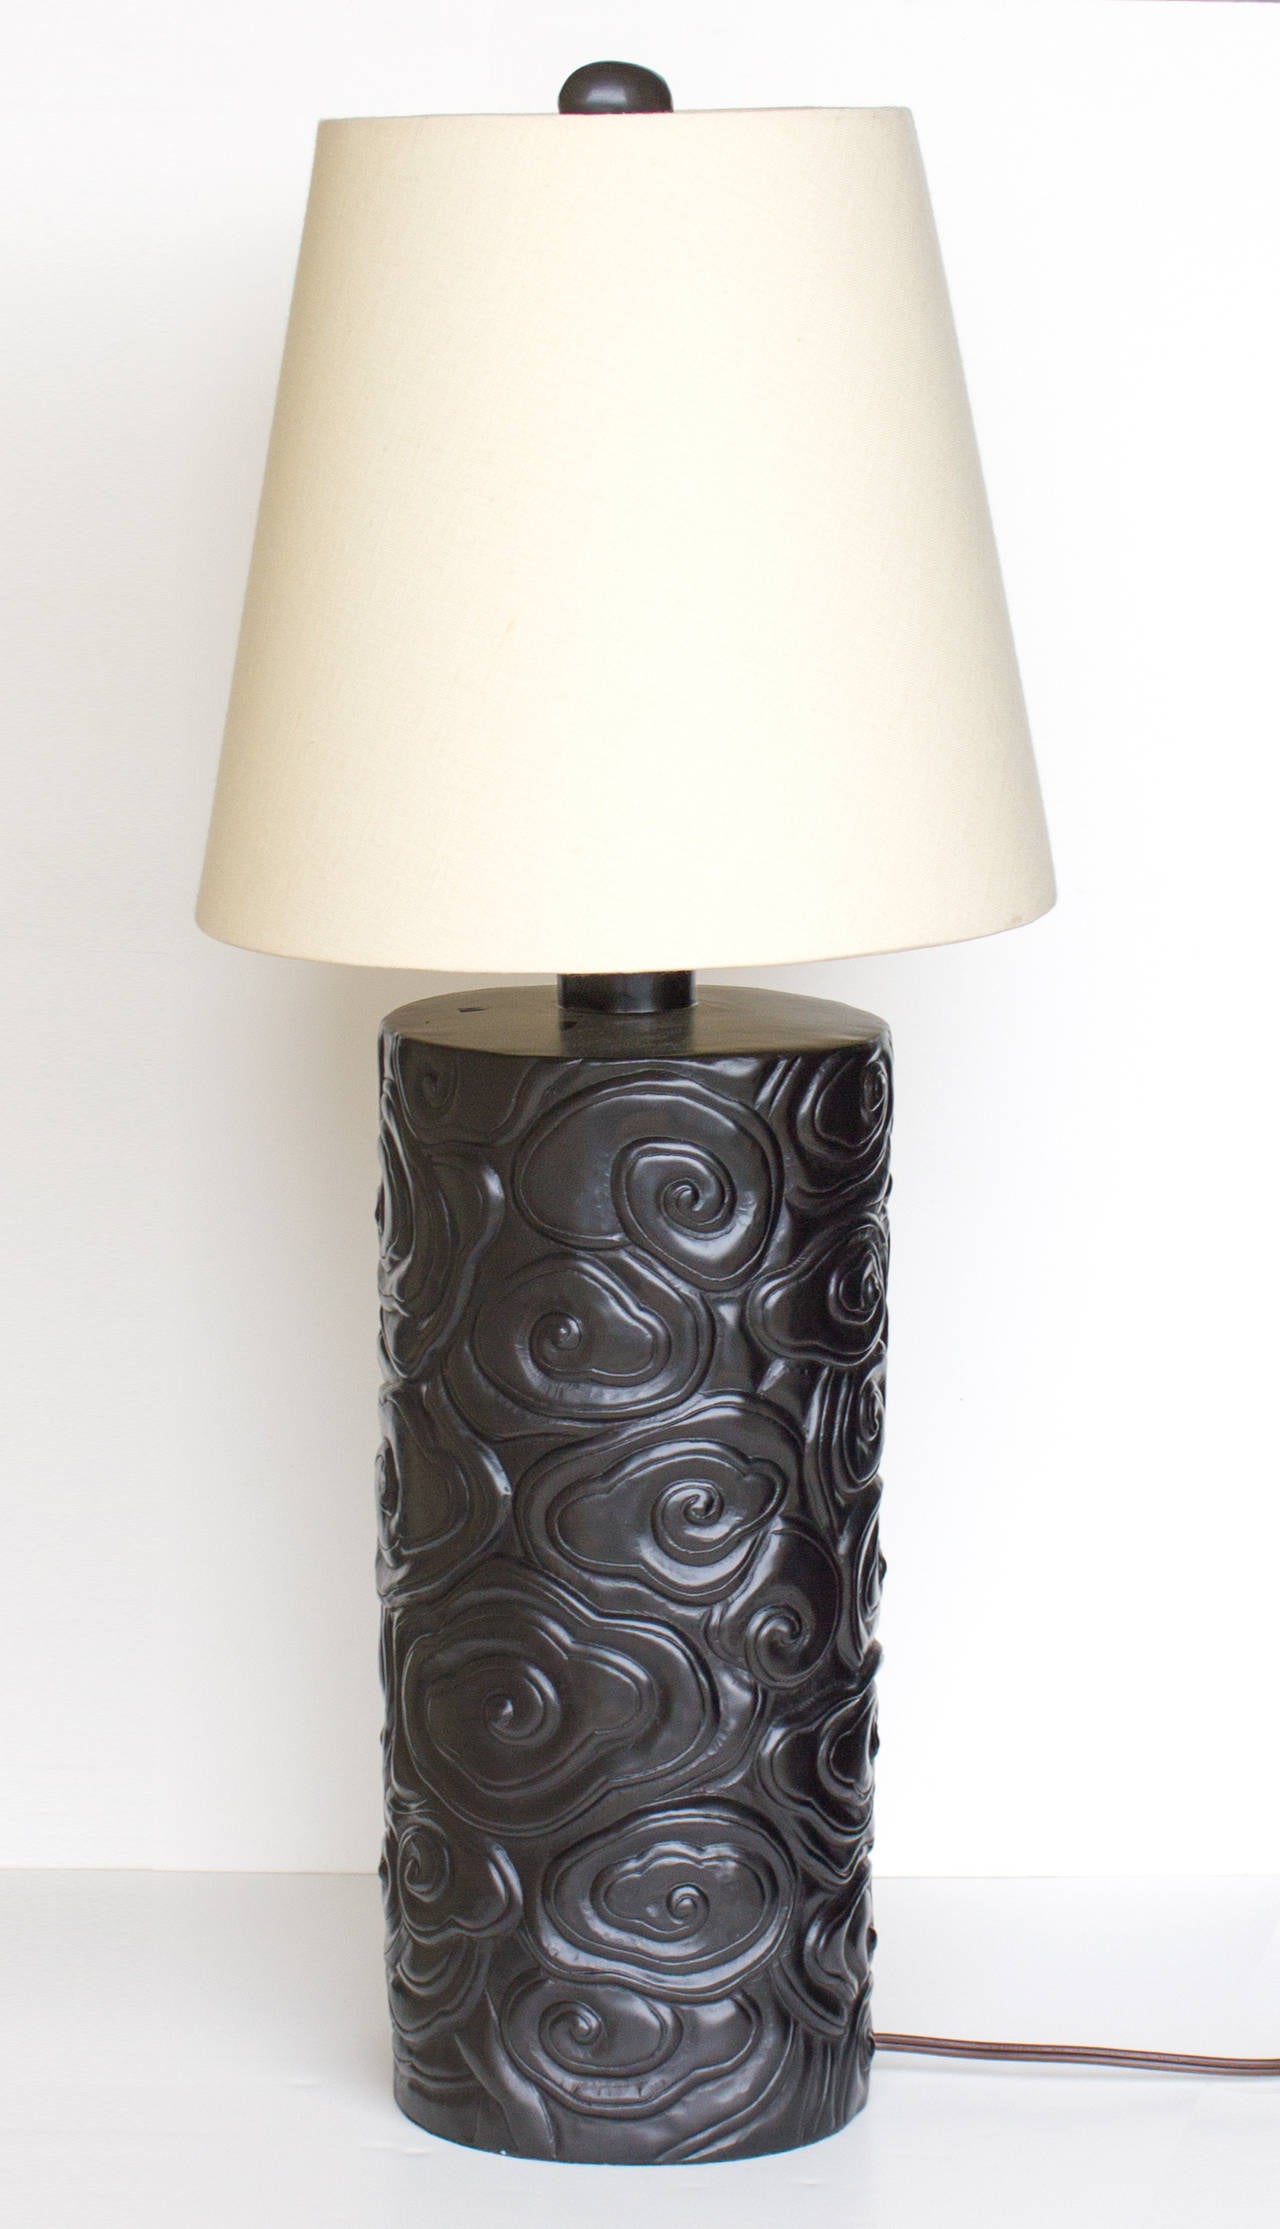 This Robert Kuo embossed lamp displays a stunning relief texture using copper repousse craftsmanship. The swirling clouds draw from traditional Chinese carving and art but the design invokes a contemporary feel. The black lacquer shade provides a